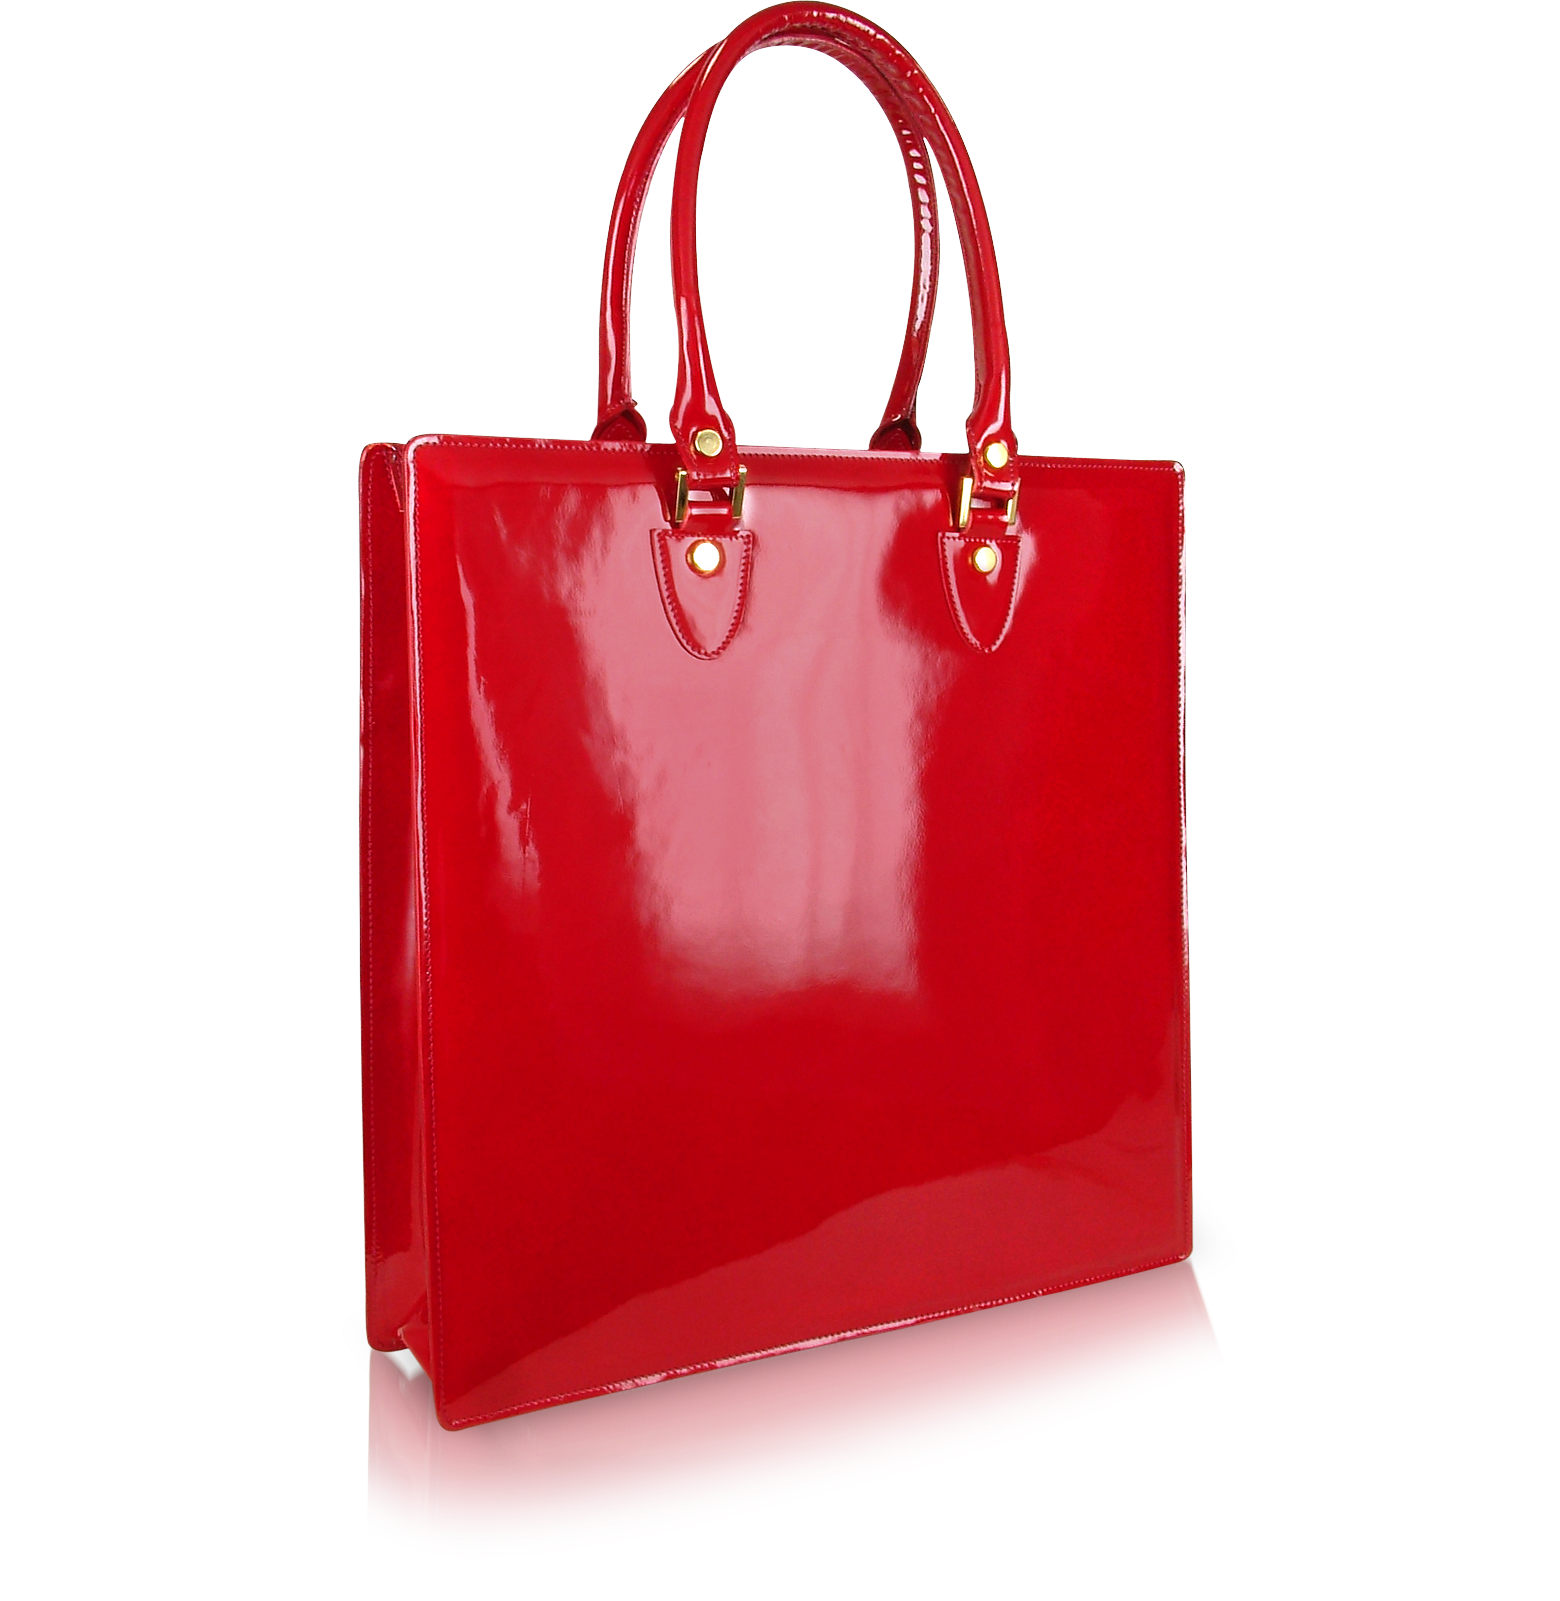 L.A.P.A. Ruby Red Patent Leather Tote at FORZIERI